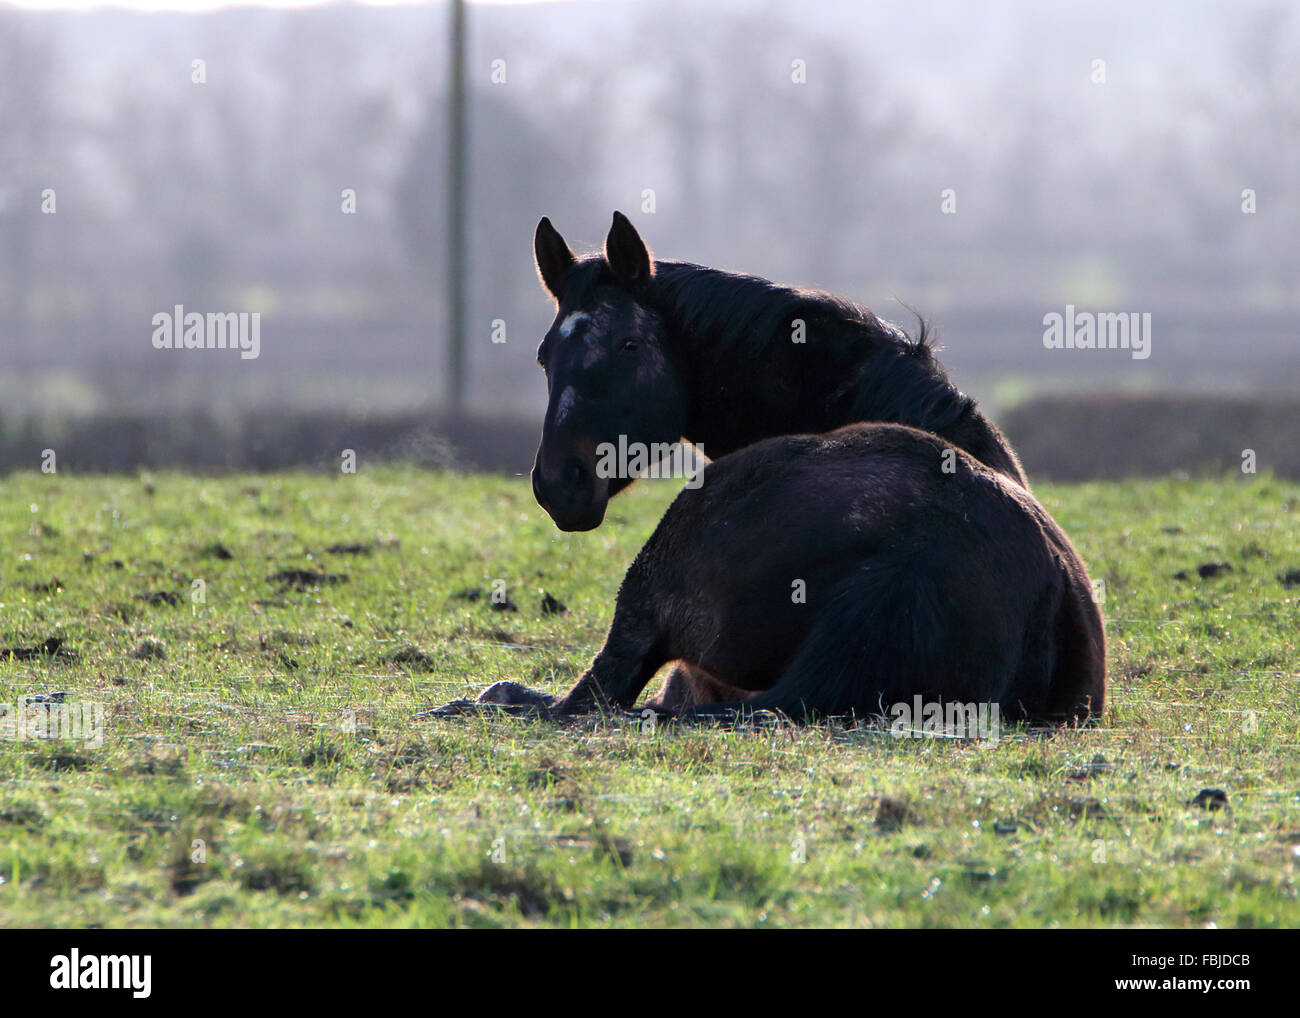 Horse Laid down in a field back lit by the sun with breath coming from its nostrils Stock Photo